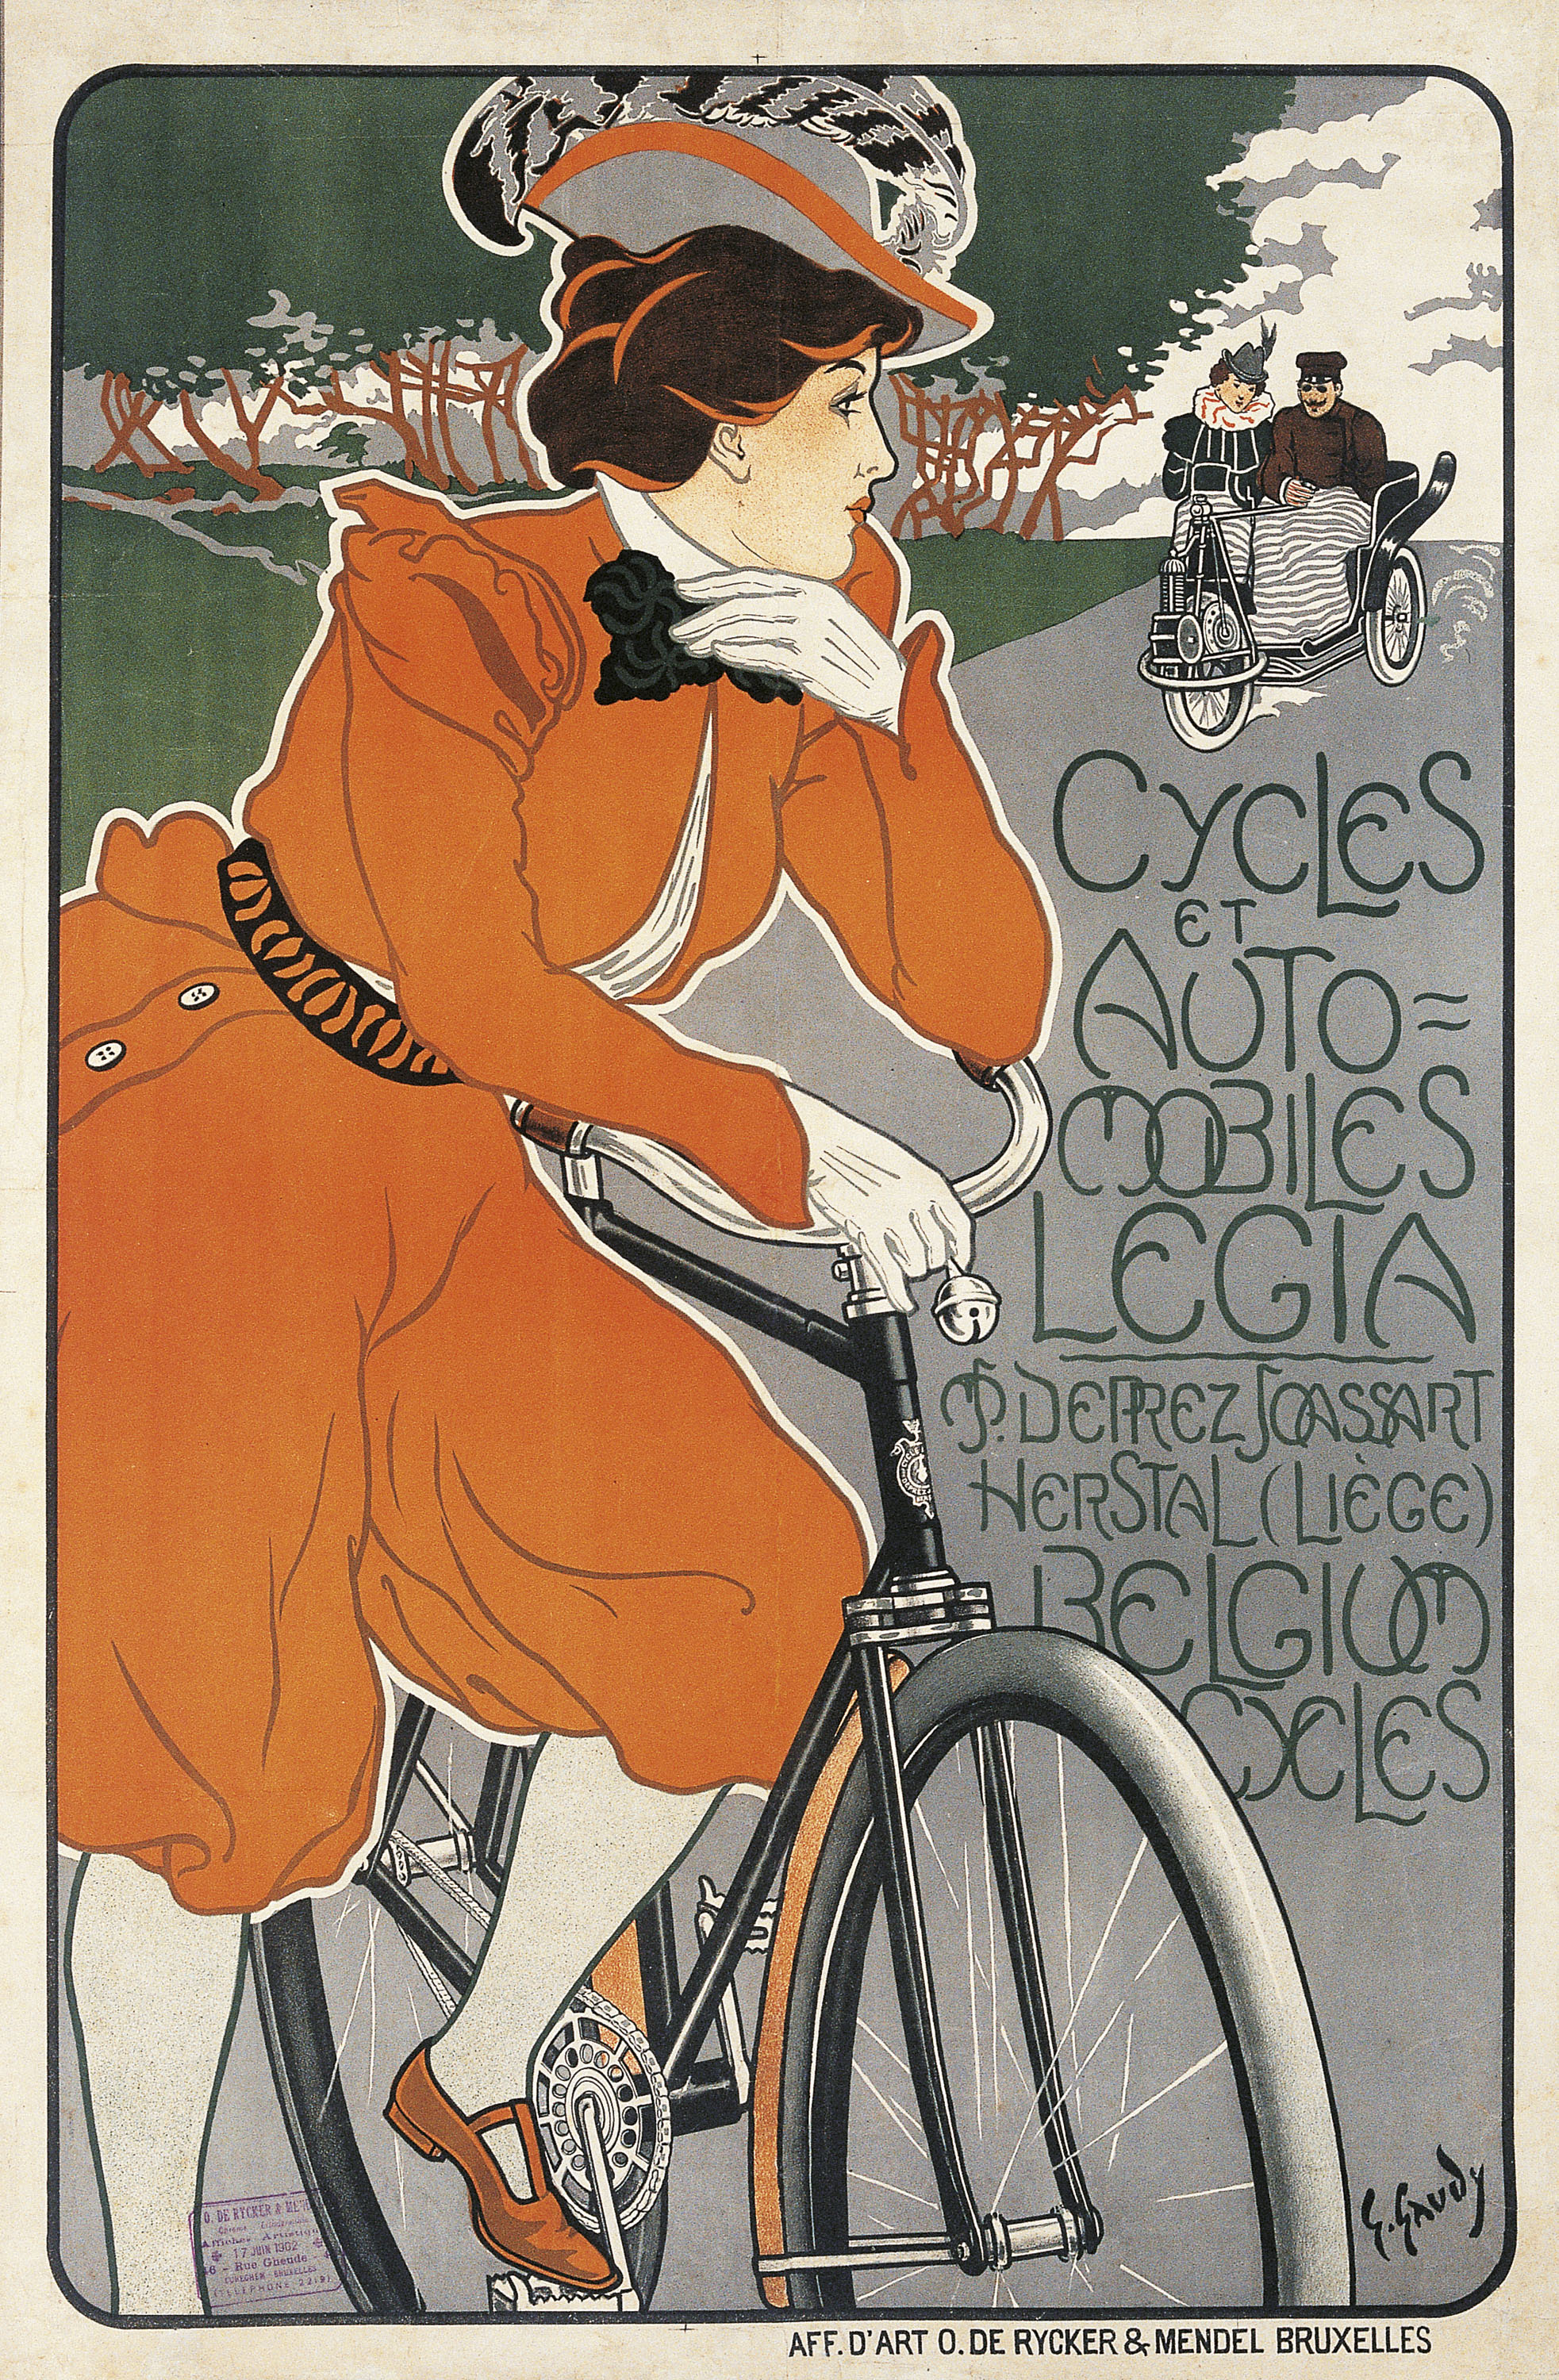 Poster for Legia Cycles and Automobiles by Georges Gaudy - 1898 - 95.2 x 64.2 cm Europeana